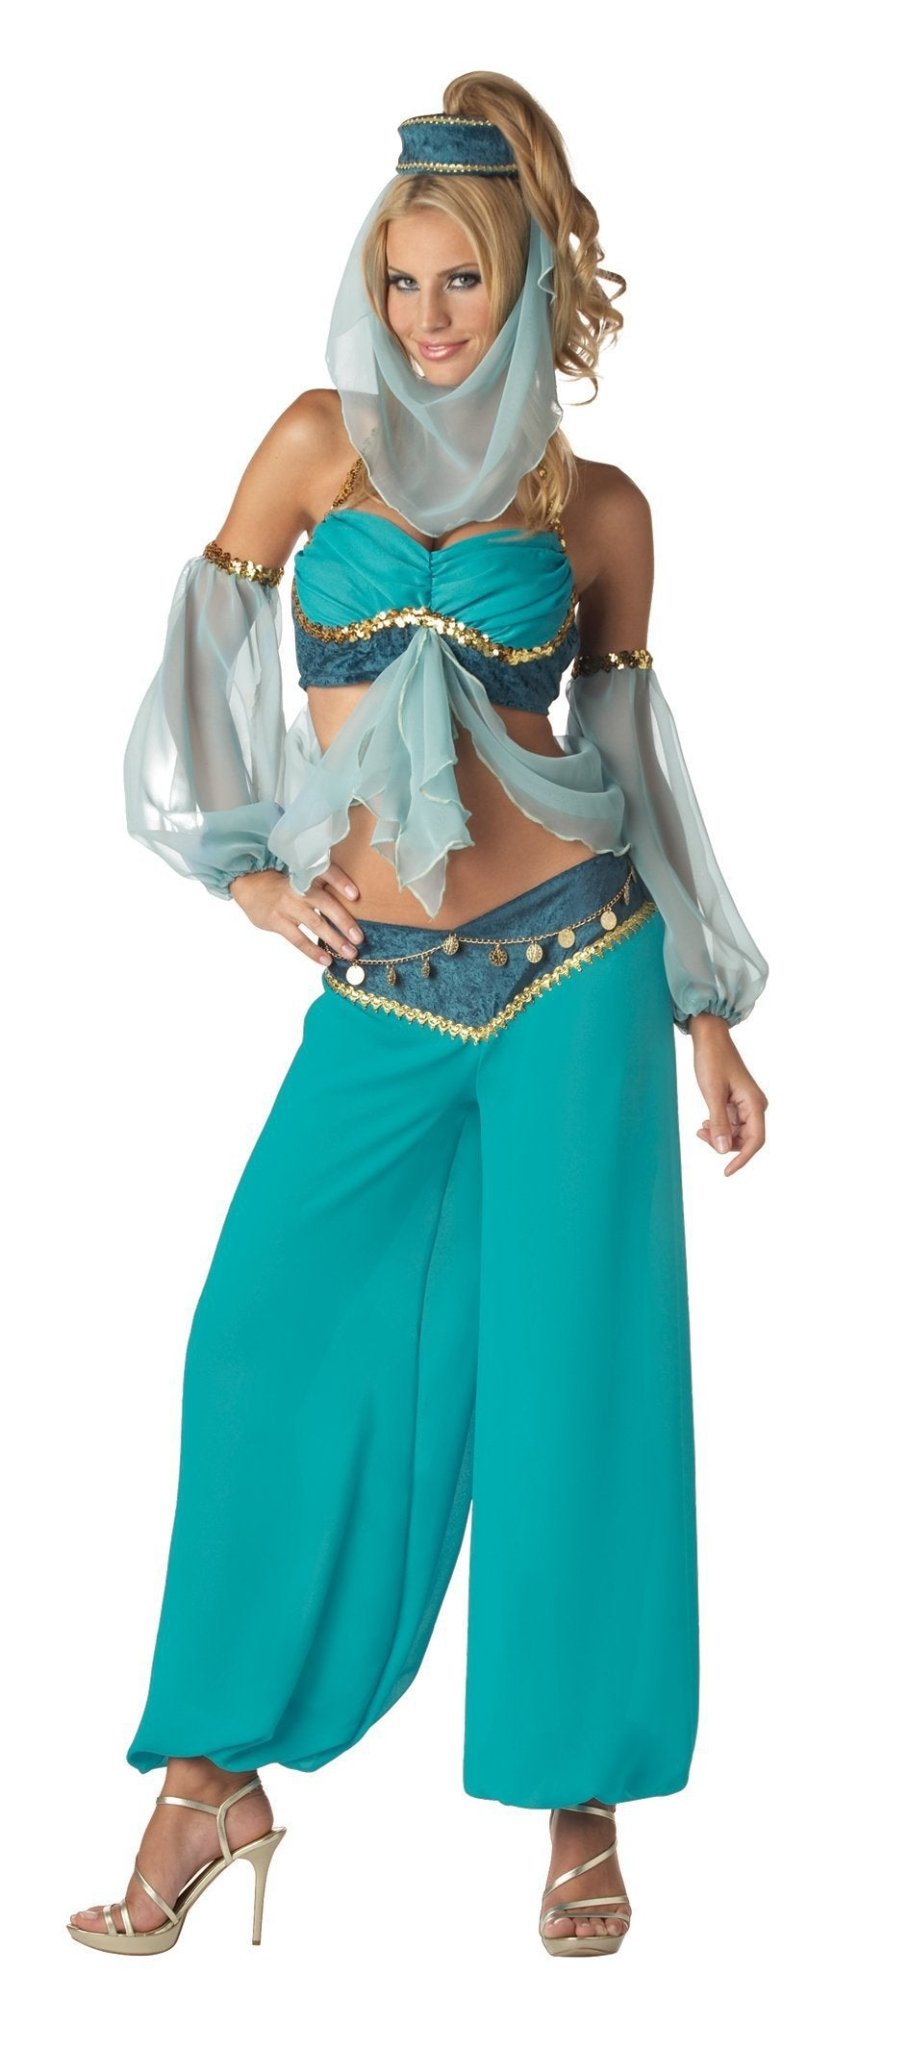 Harem's Jewel Deluxe Costume - JJ's Party House